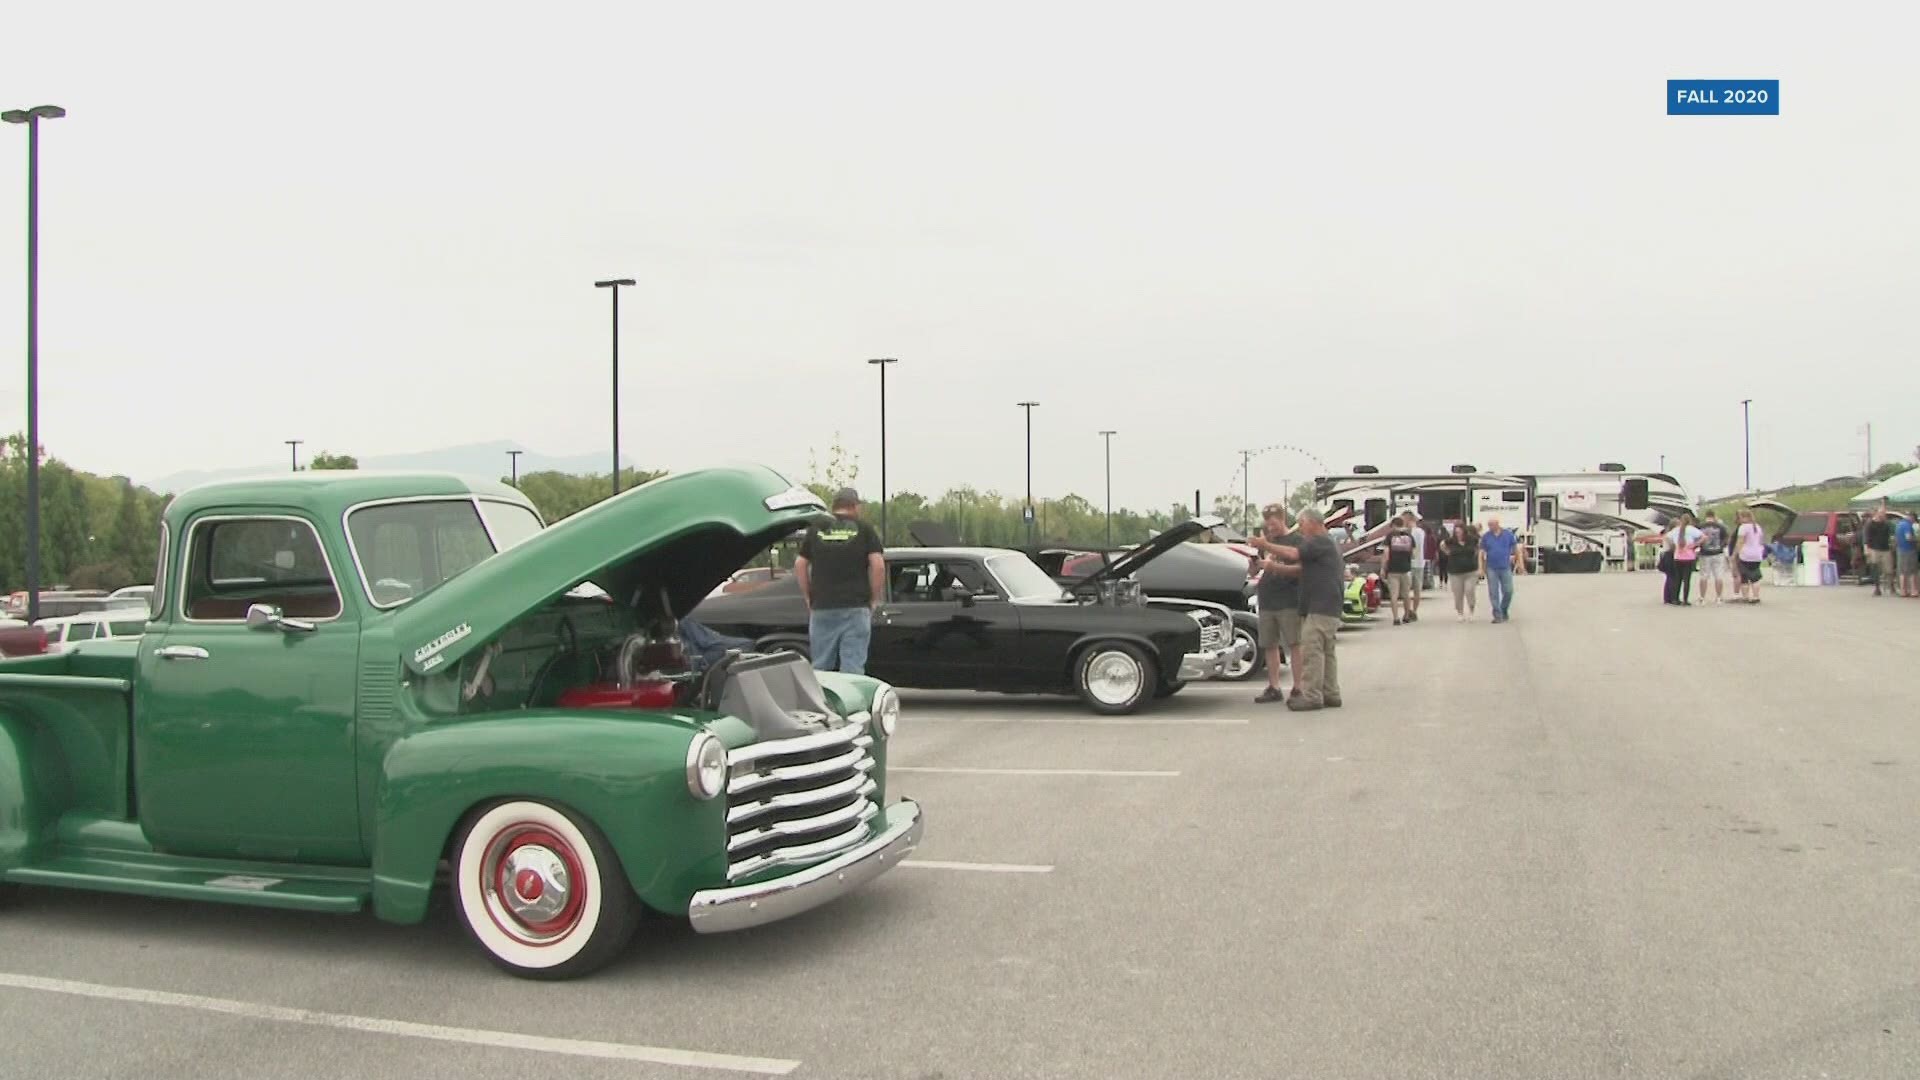 Some community members want to see an end to the regular Rod Run events in Pigeon Forge.